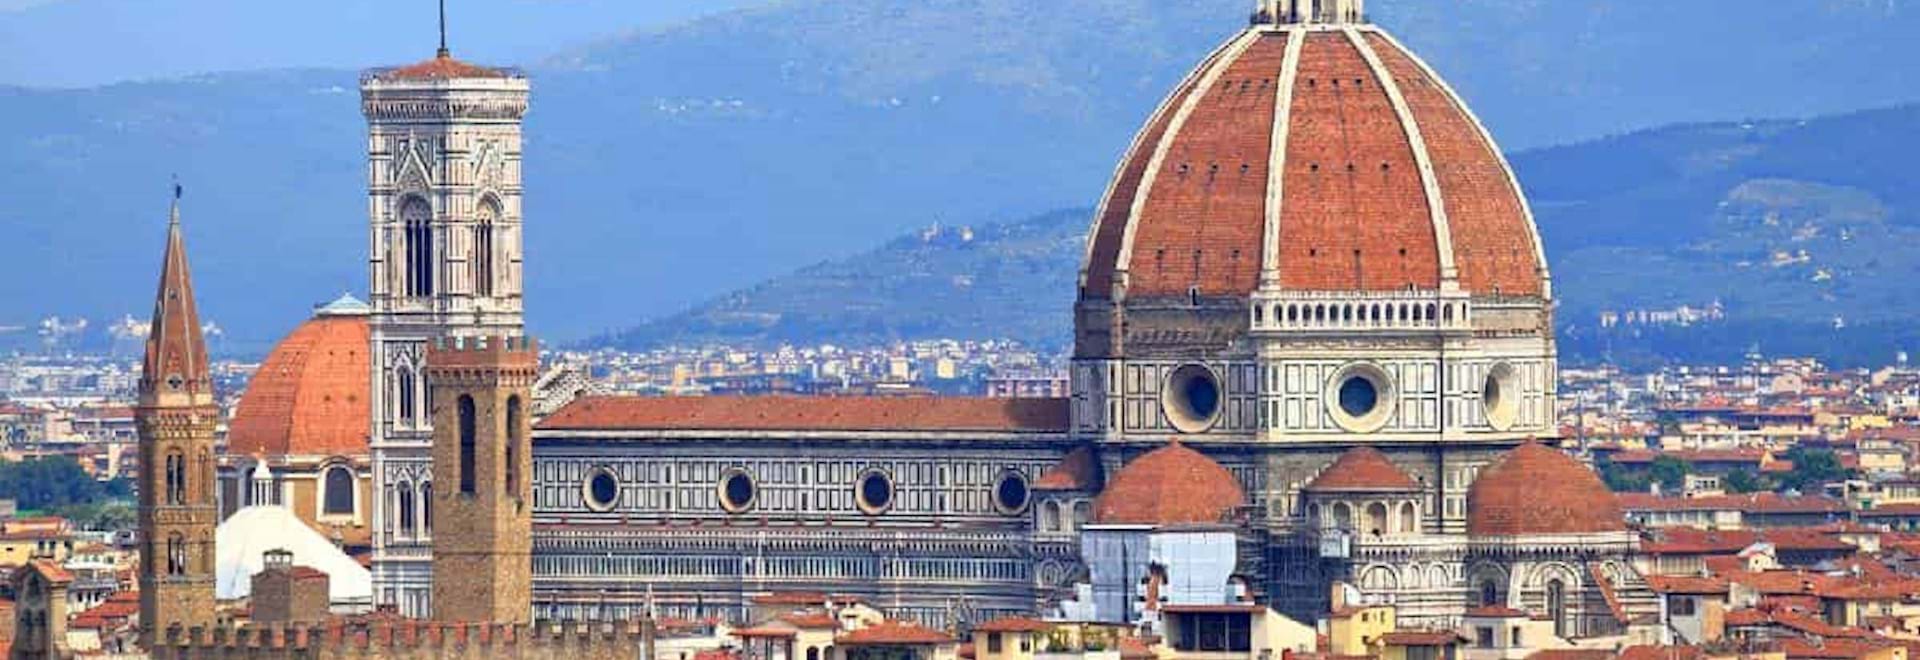 Panoramic view of the Cathedral of Santa Maria del Fiore in Florence with his Dome and the Bell Tower